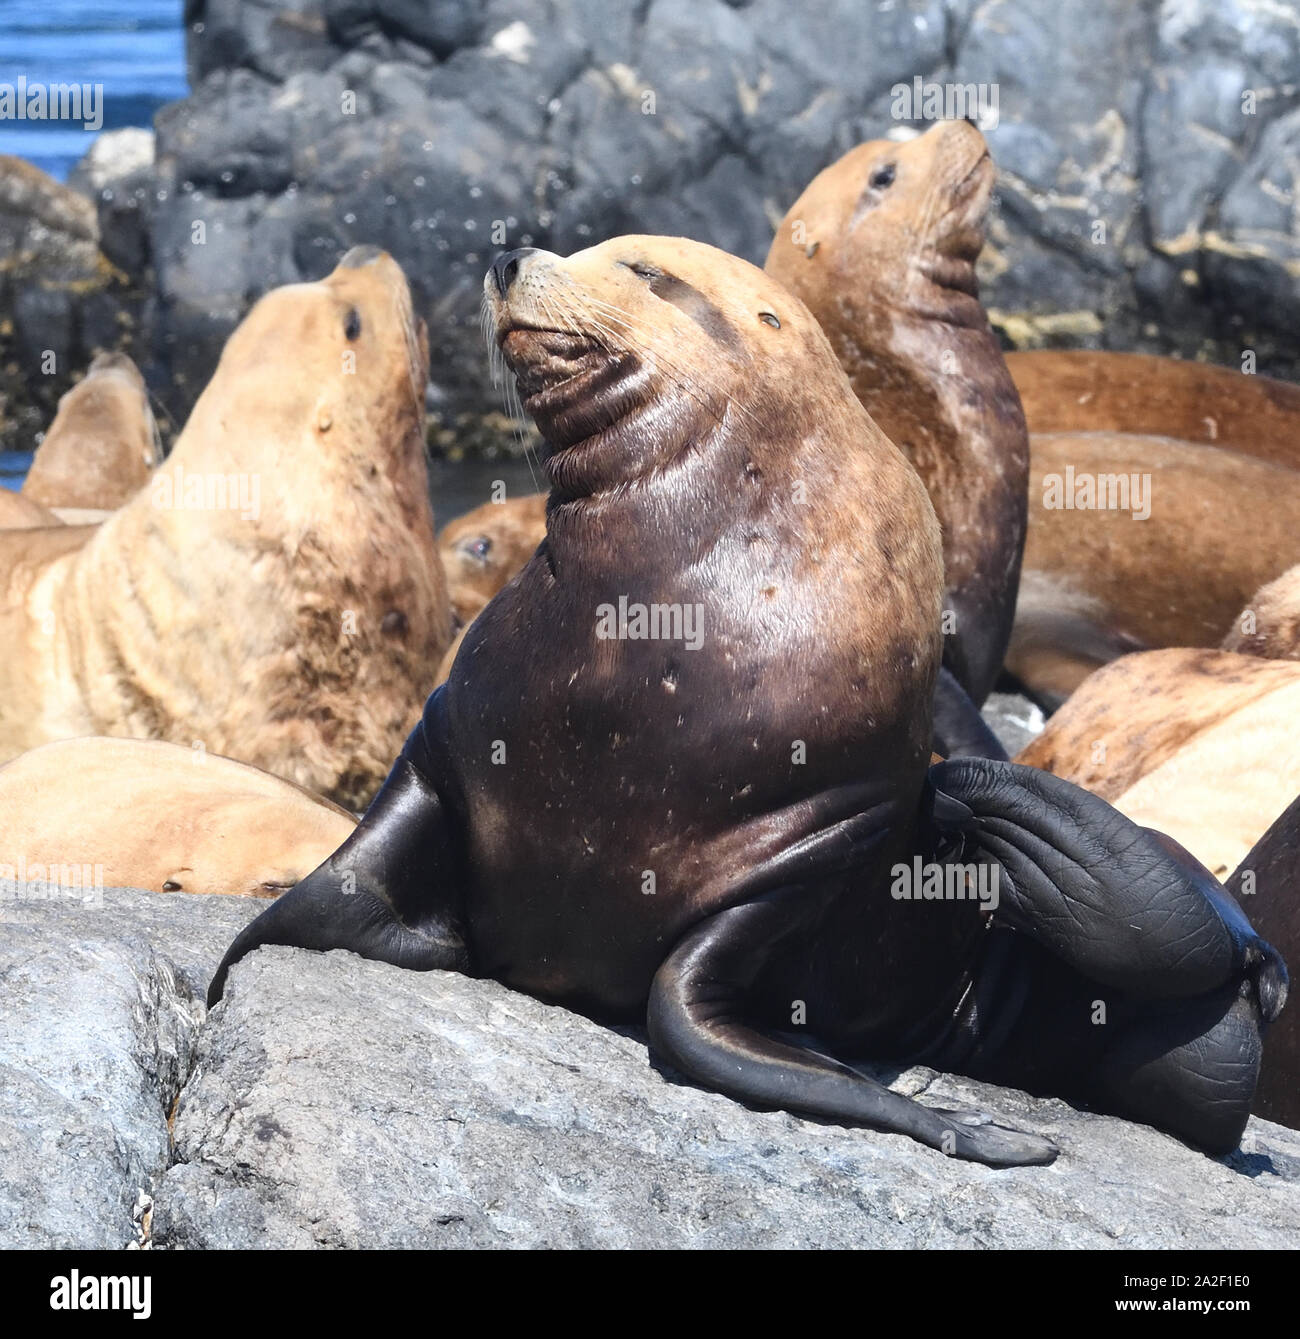 A Steller sea lion or northern sea lion (Eumetopias jubatus) scratches with its powerful back flipper.  Race Rocks, Victoria, British Columbia, Canada Stock Photo